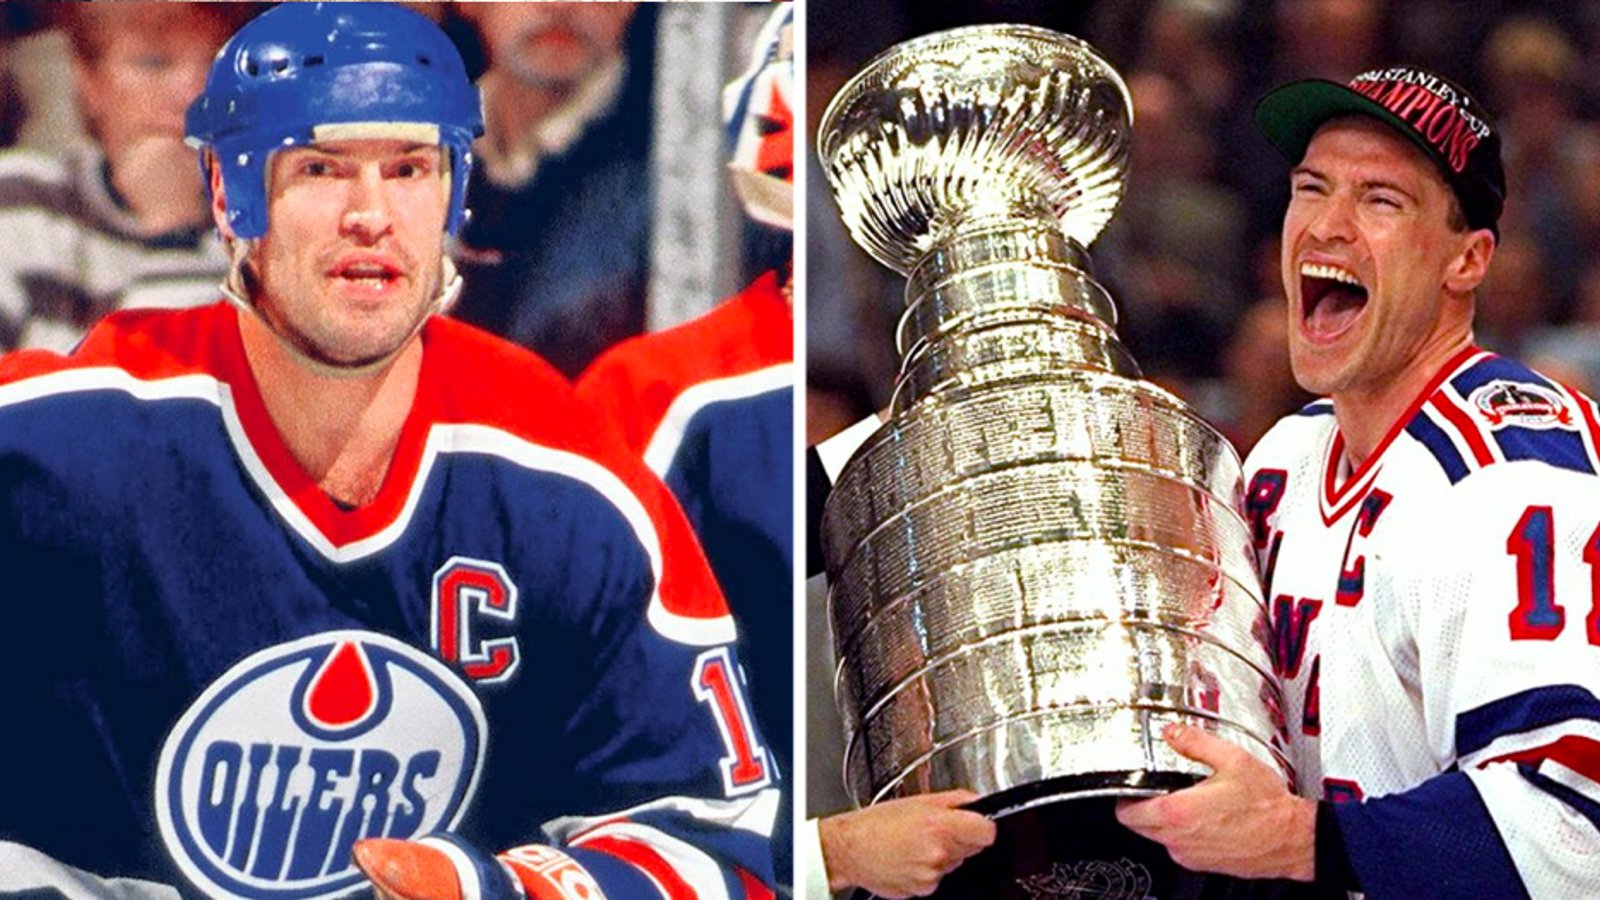 Messier sues cannabis company after they allegedly ripped him off for $500,000